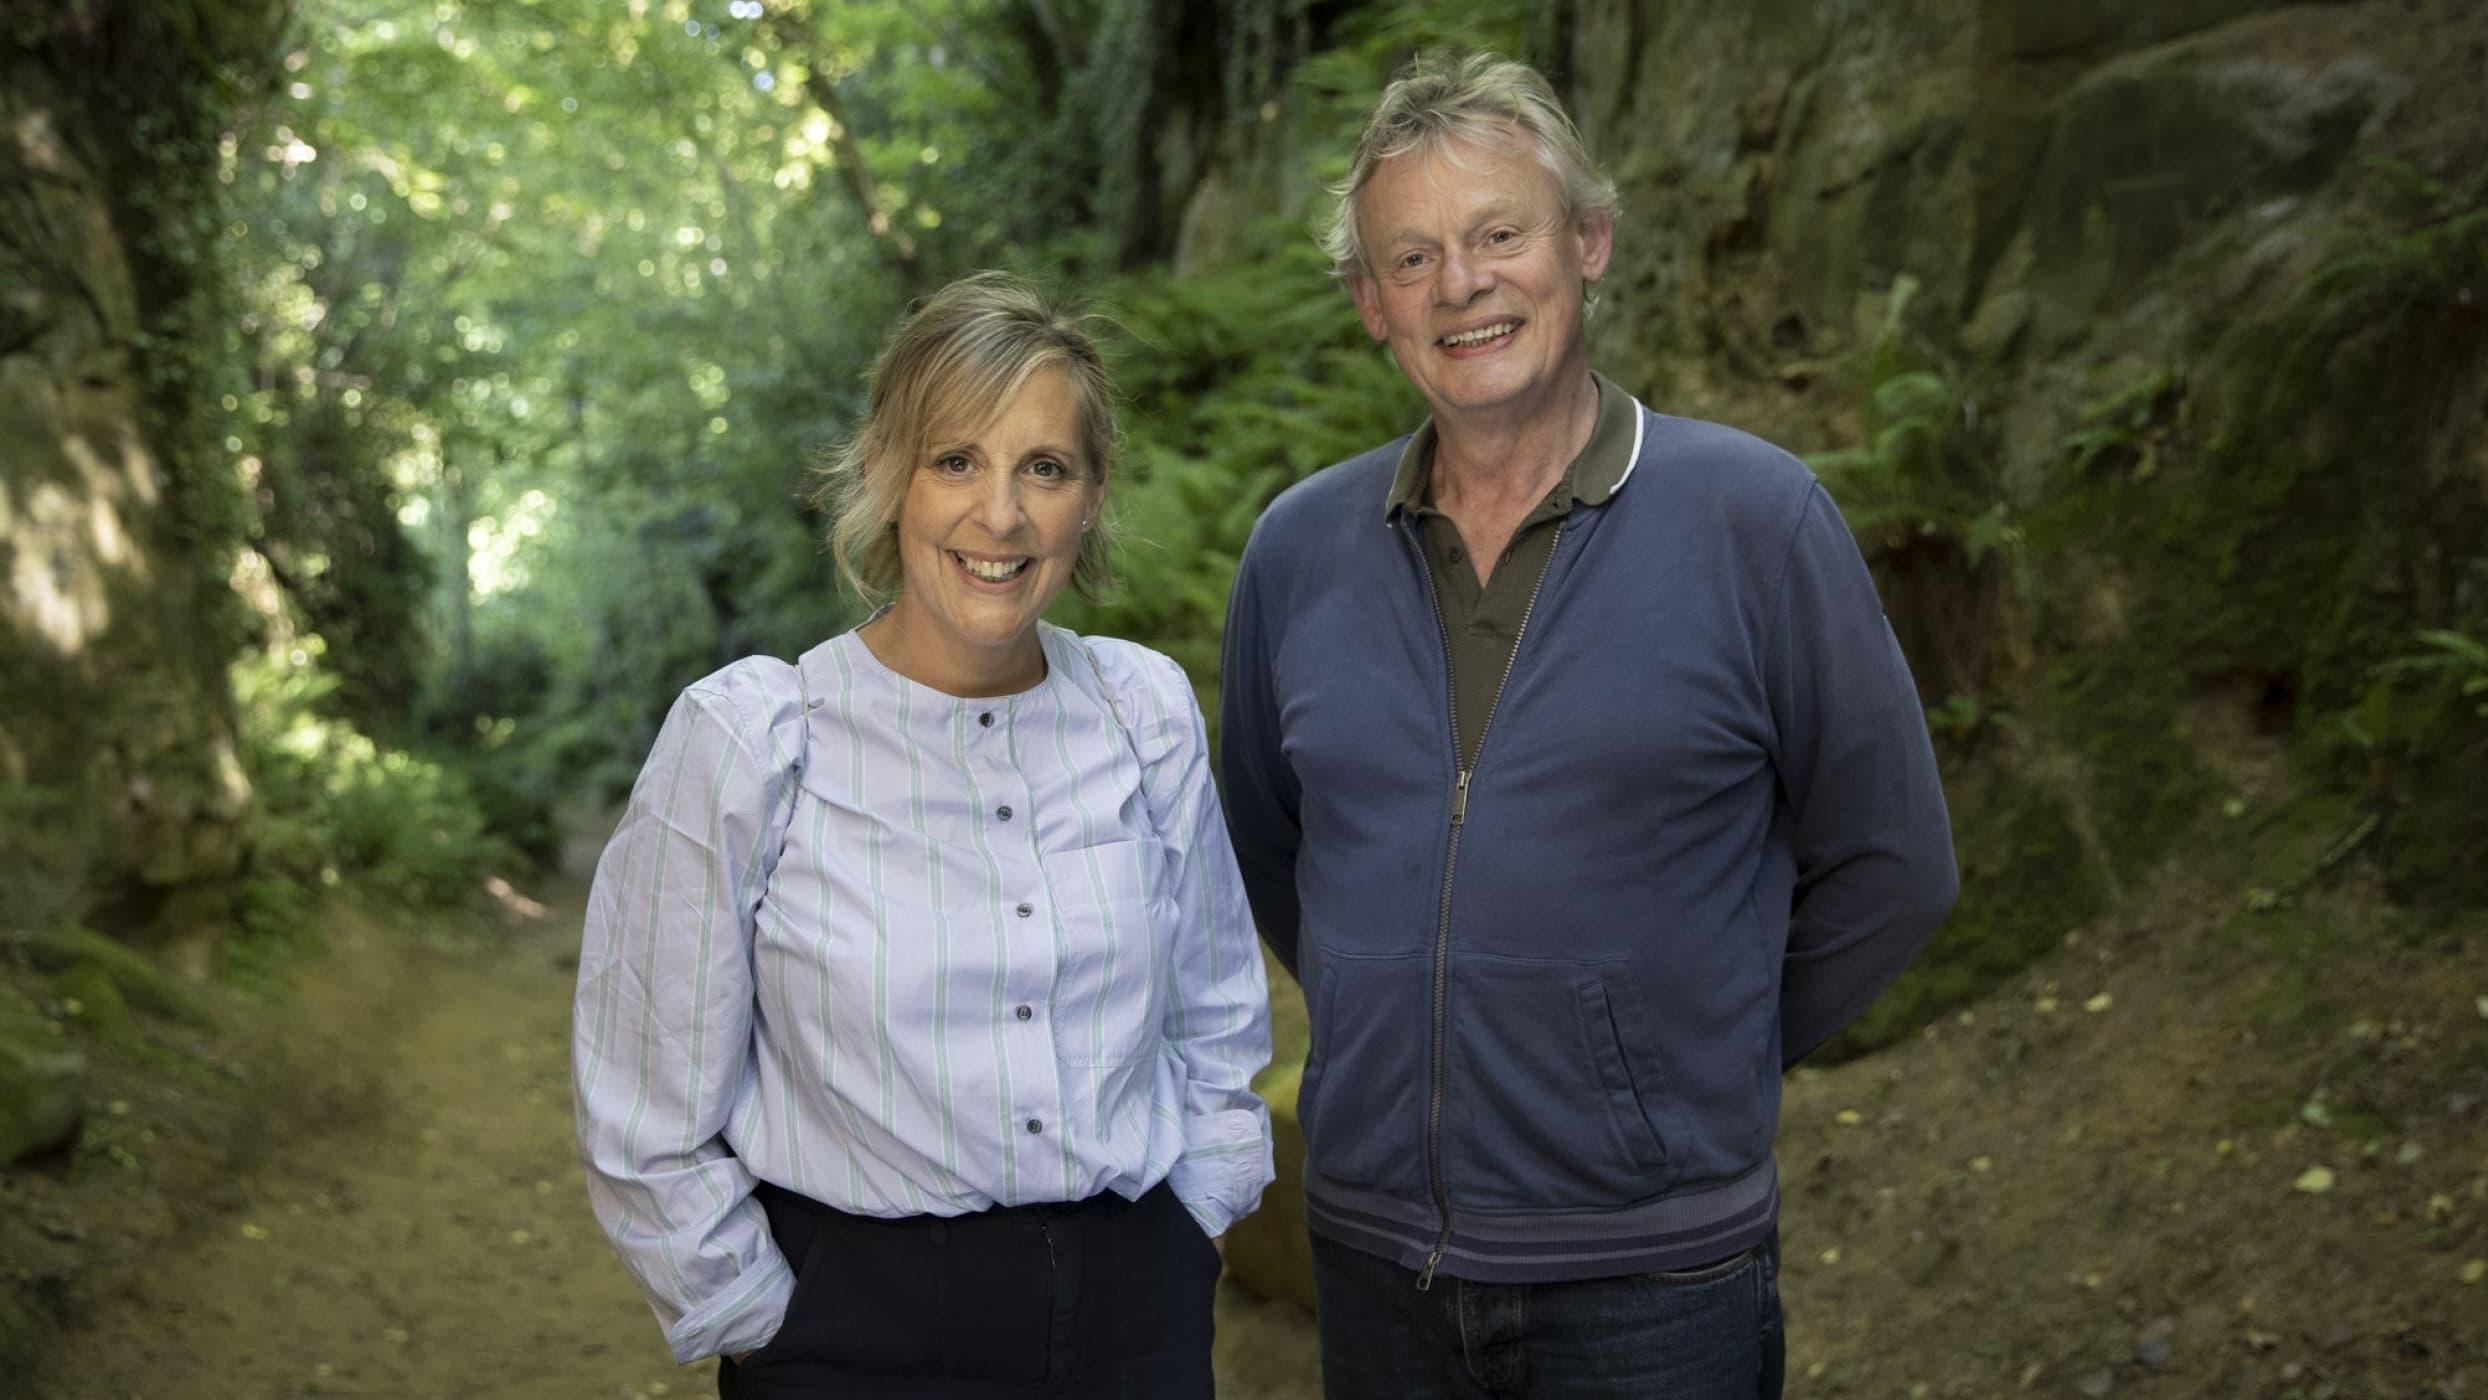 Mel Giedroyc & Martin Clunes Explore Britain by the Book backdrop